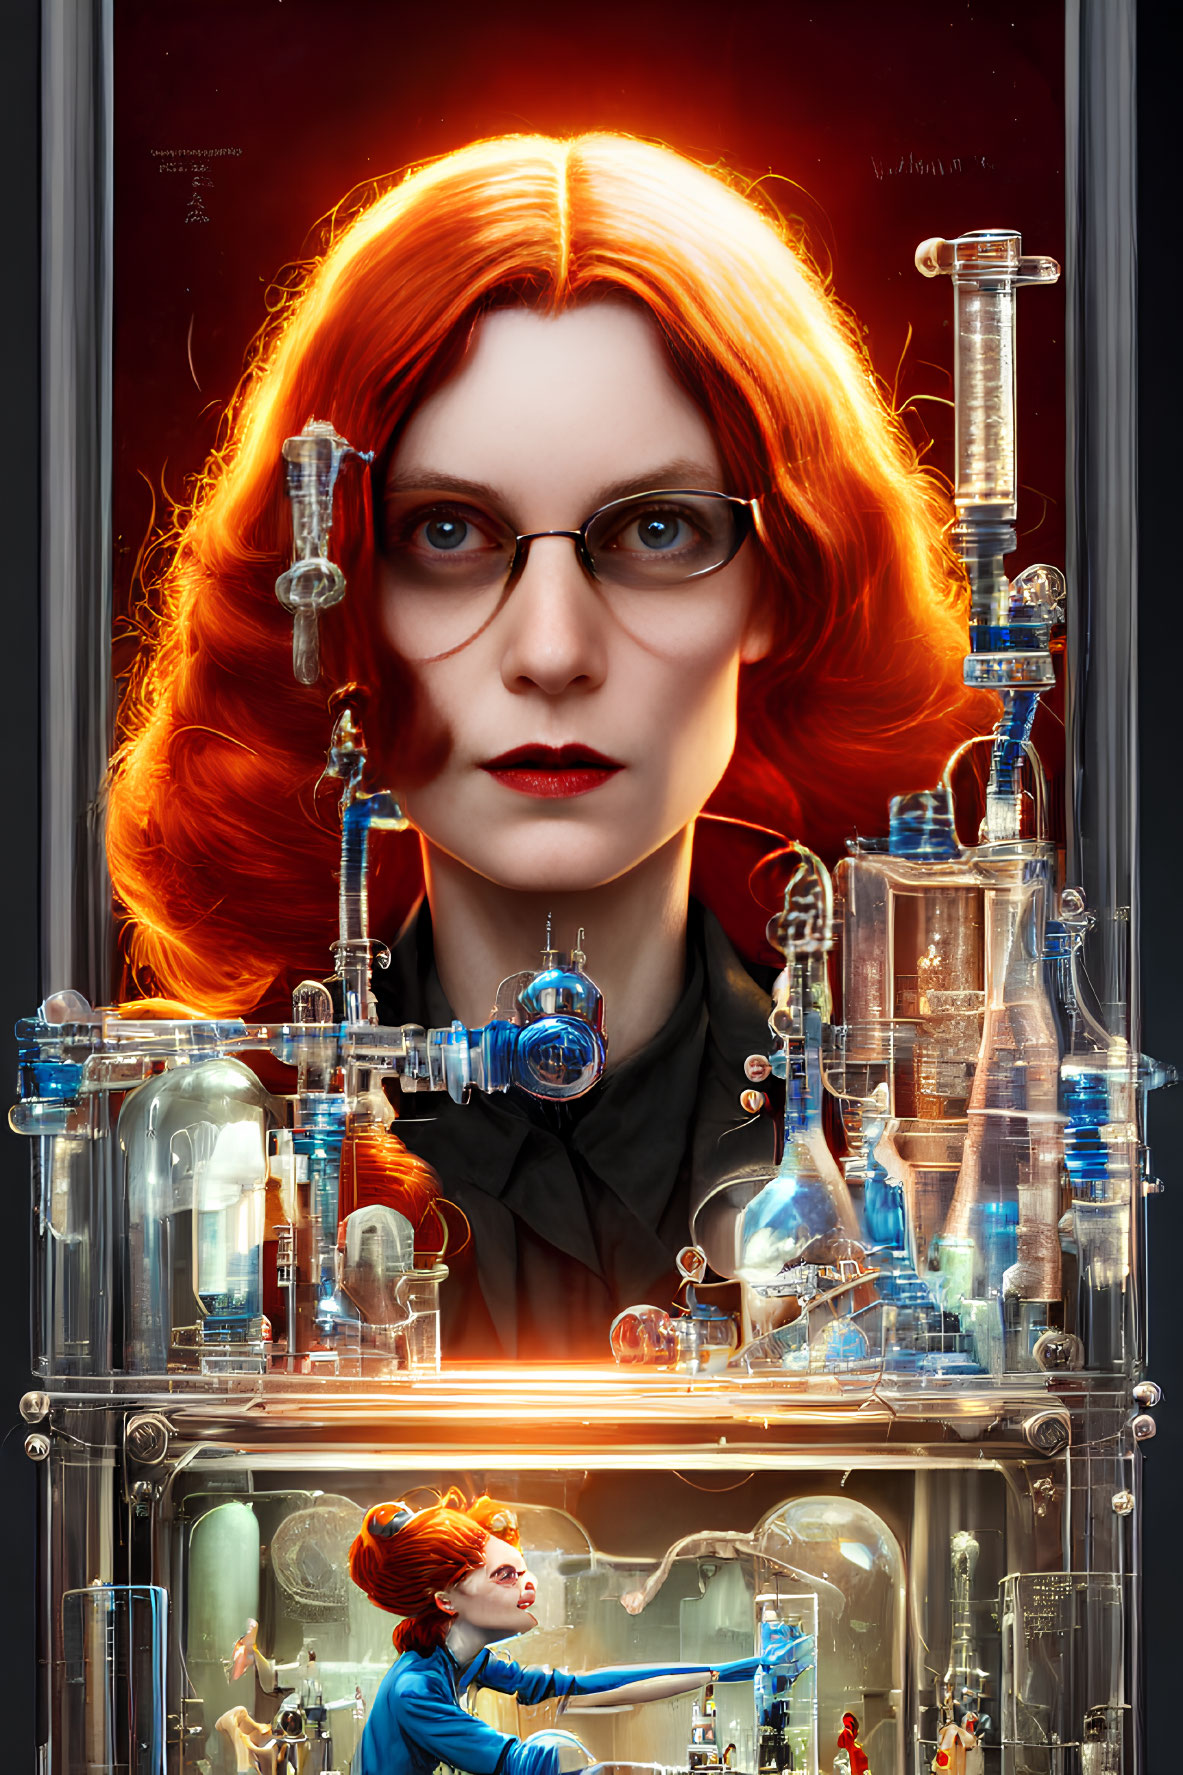 Woman with Red Hair and Glasses in Glass Lab Equipment Scene